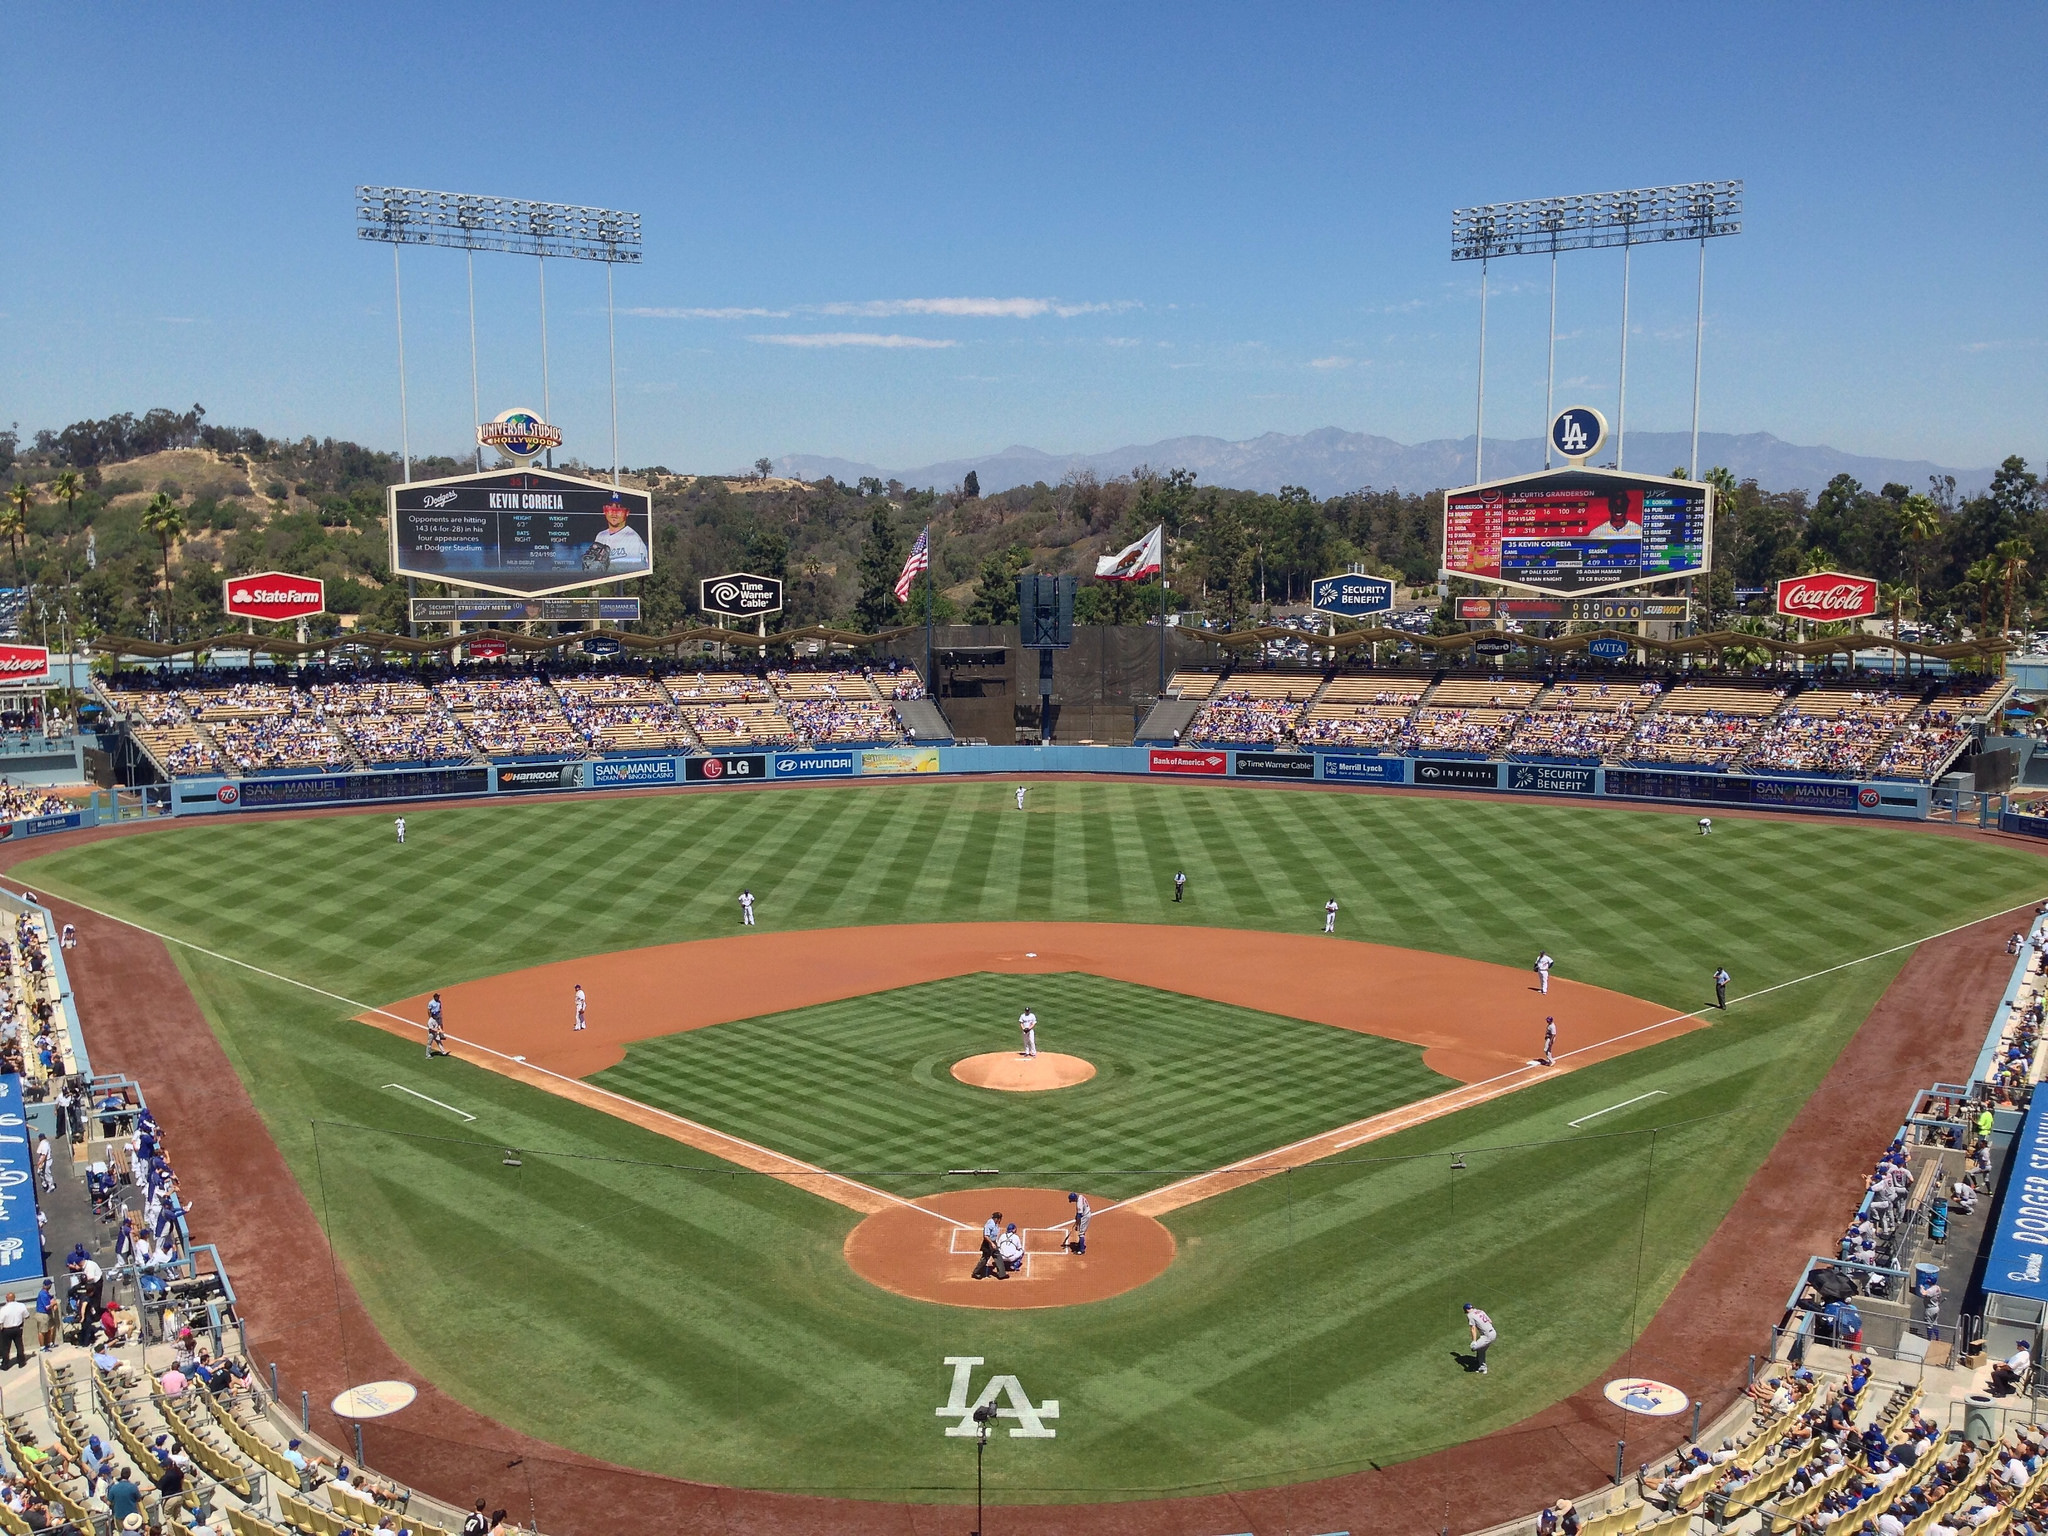 How the Dodger baseball stadium shaped LA – and revealed its divisions, Cities